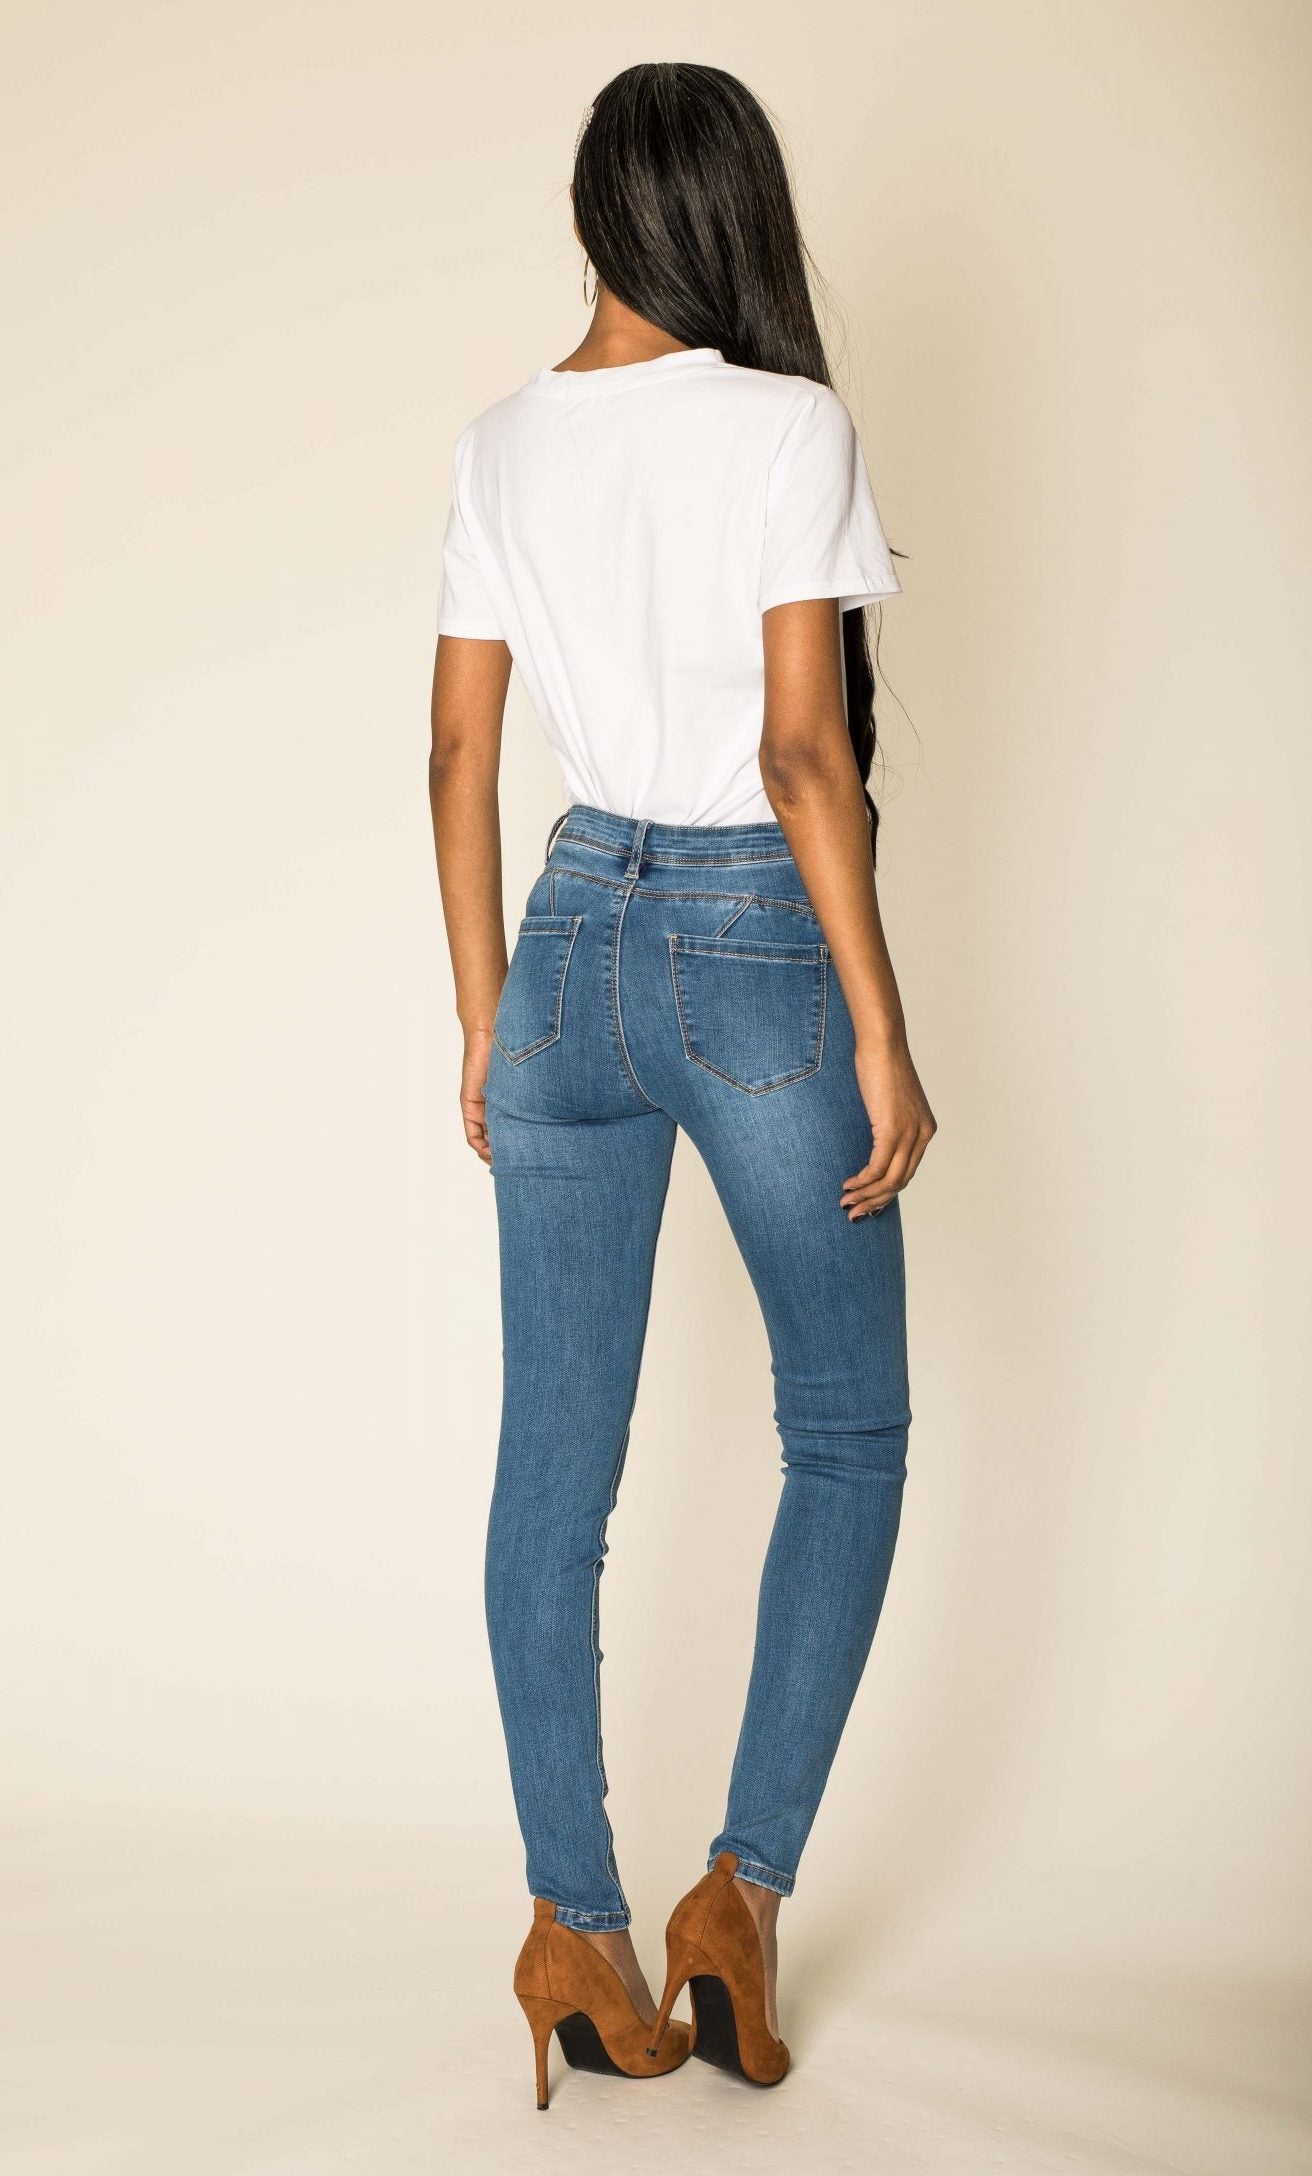 Wholesale 1 Button High Waist Jeans - New Pack